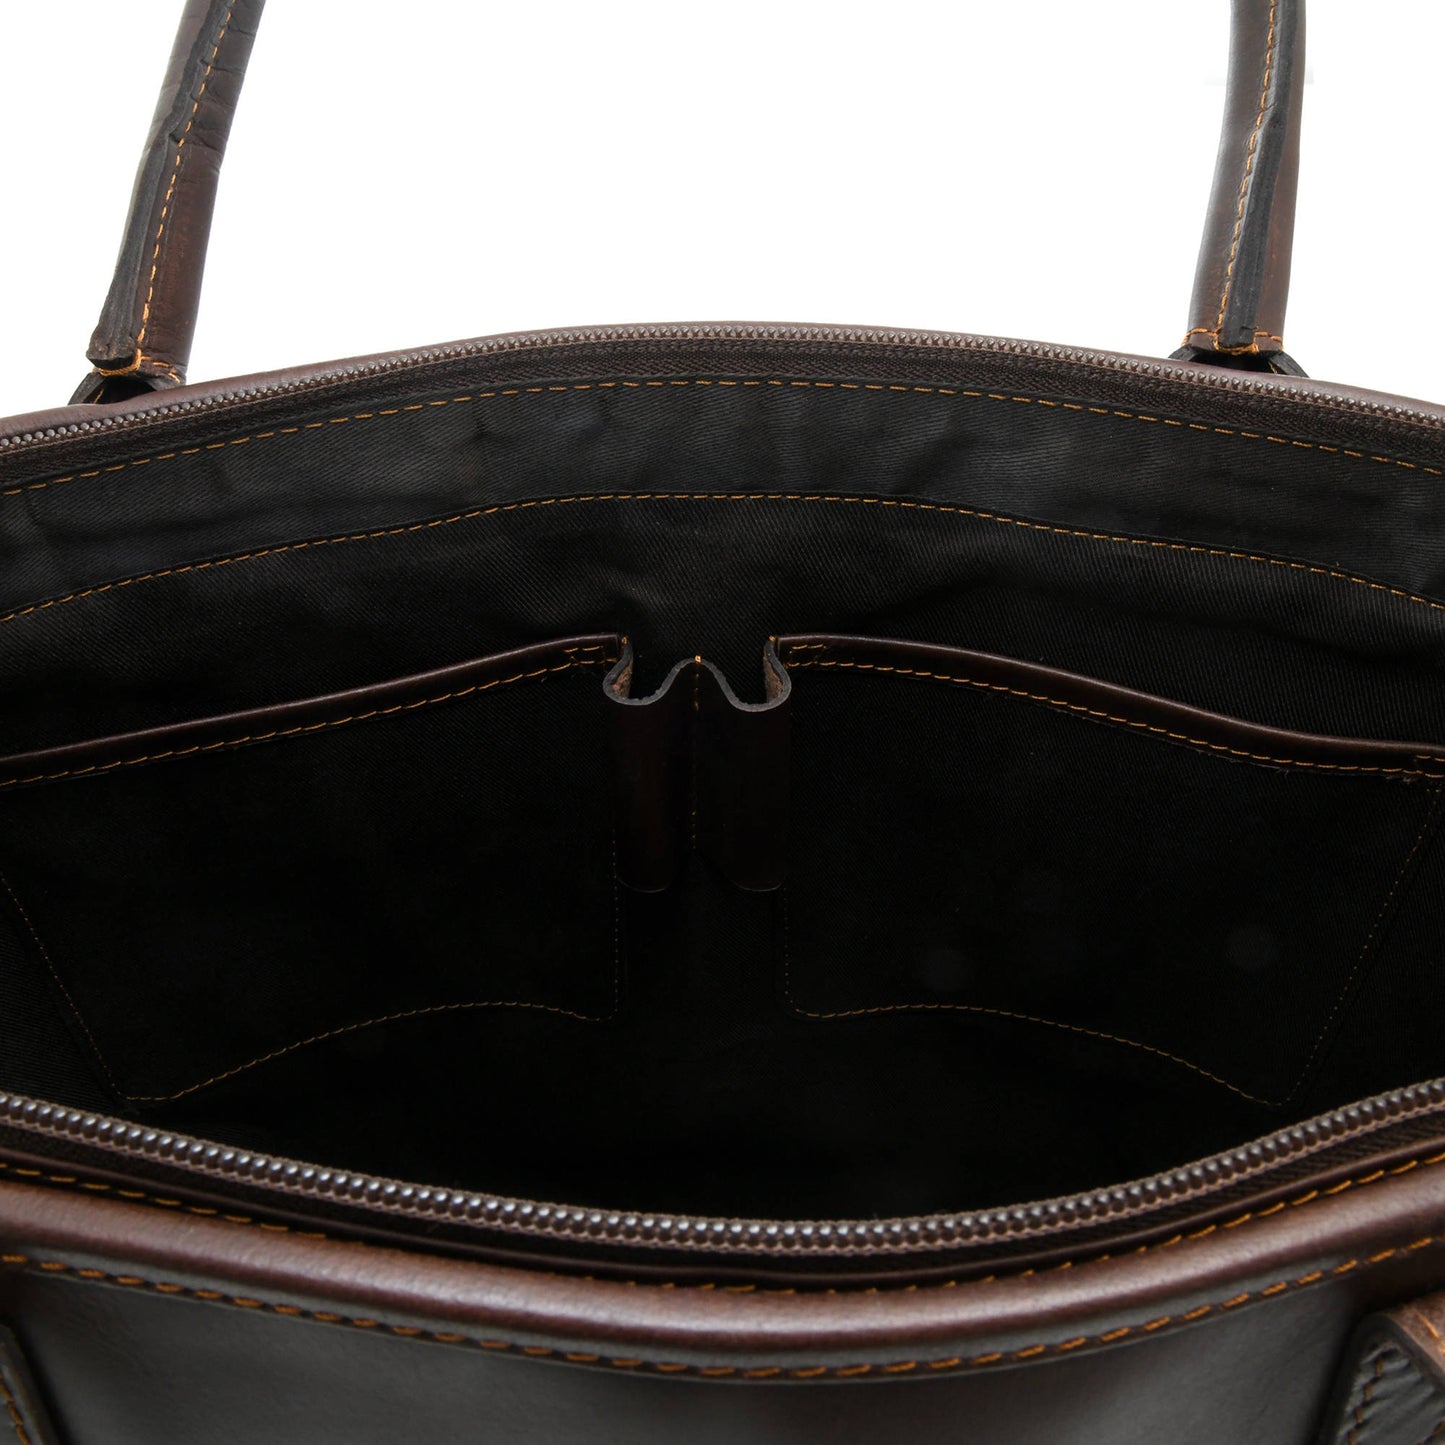 Style n Craft 392003 Men's Tote Bag in Full Grain Dark Brown Leather - Inside Front Wall Pockets - Closeup View